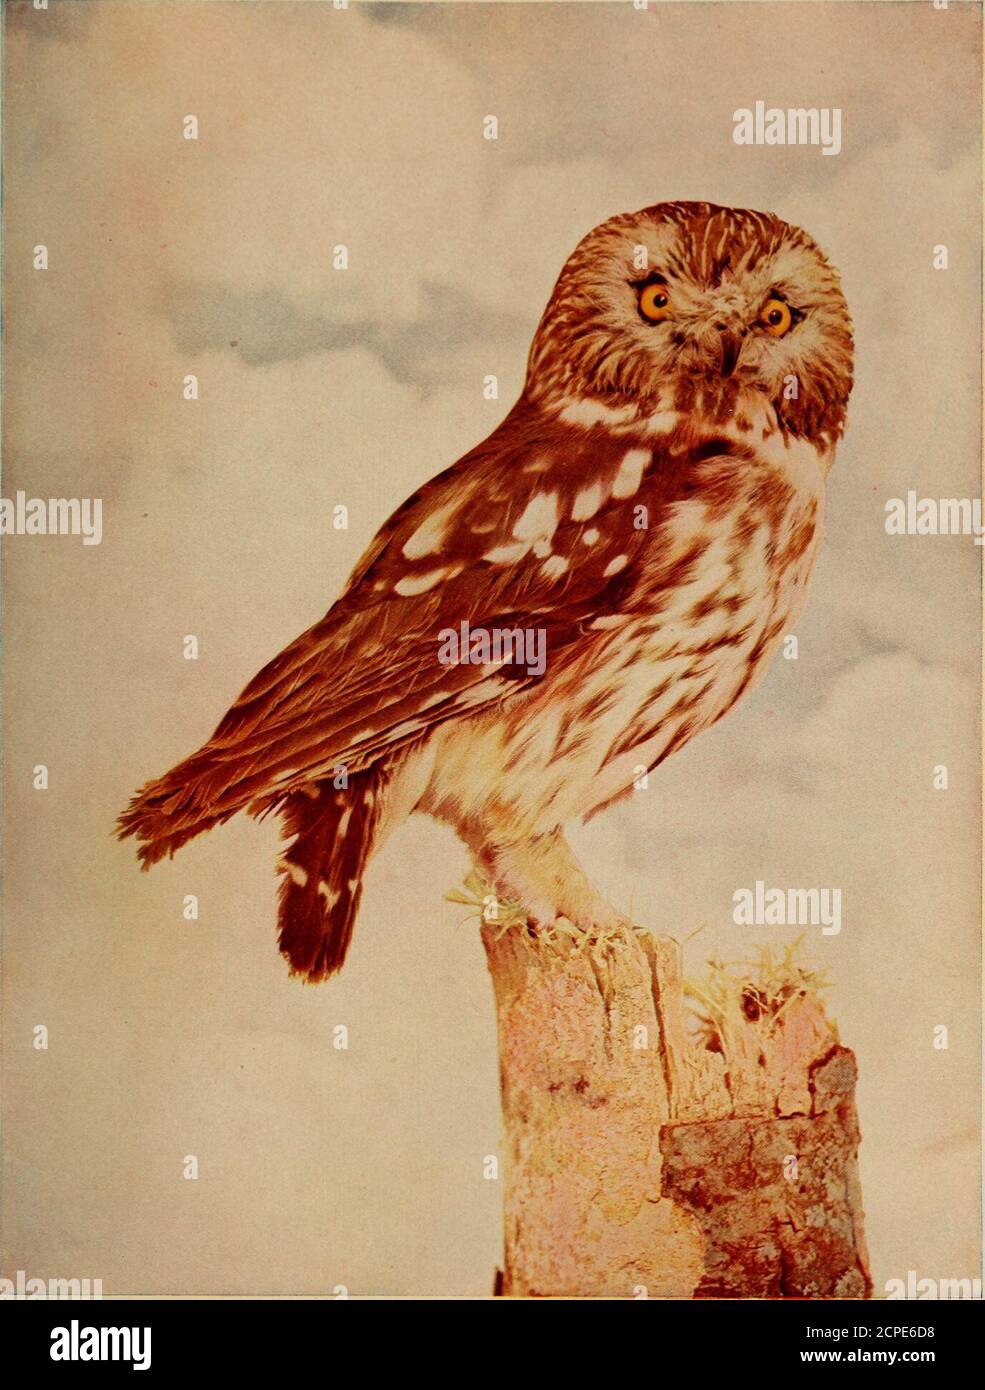 Page 10 - Like Owl High Resolution Stock Photography and Images - Alamy